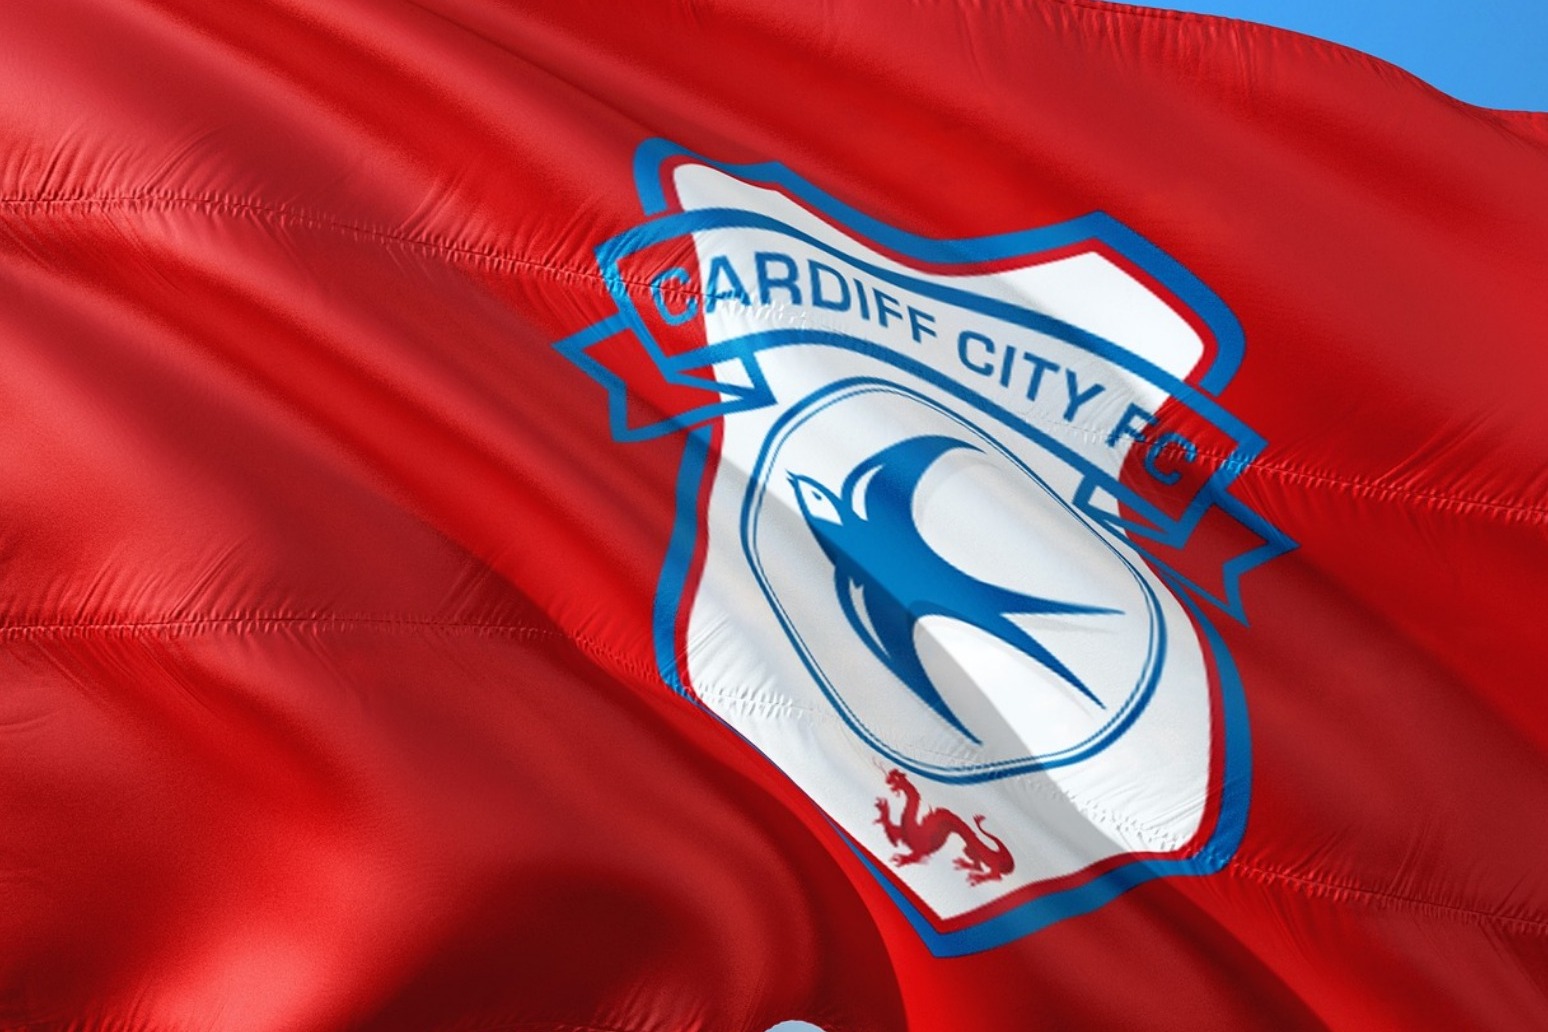 Cardiff relegated from the Premier League 